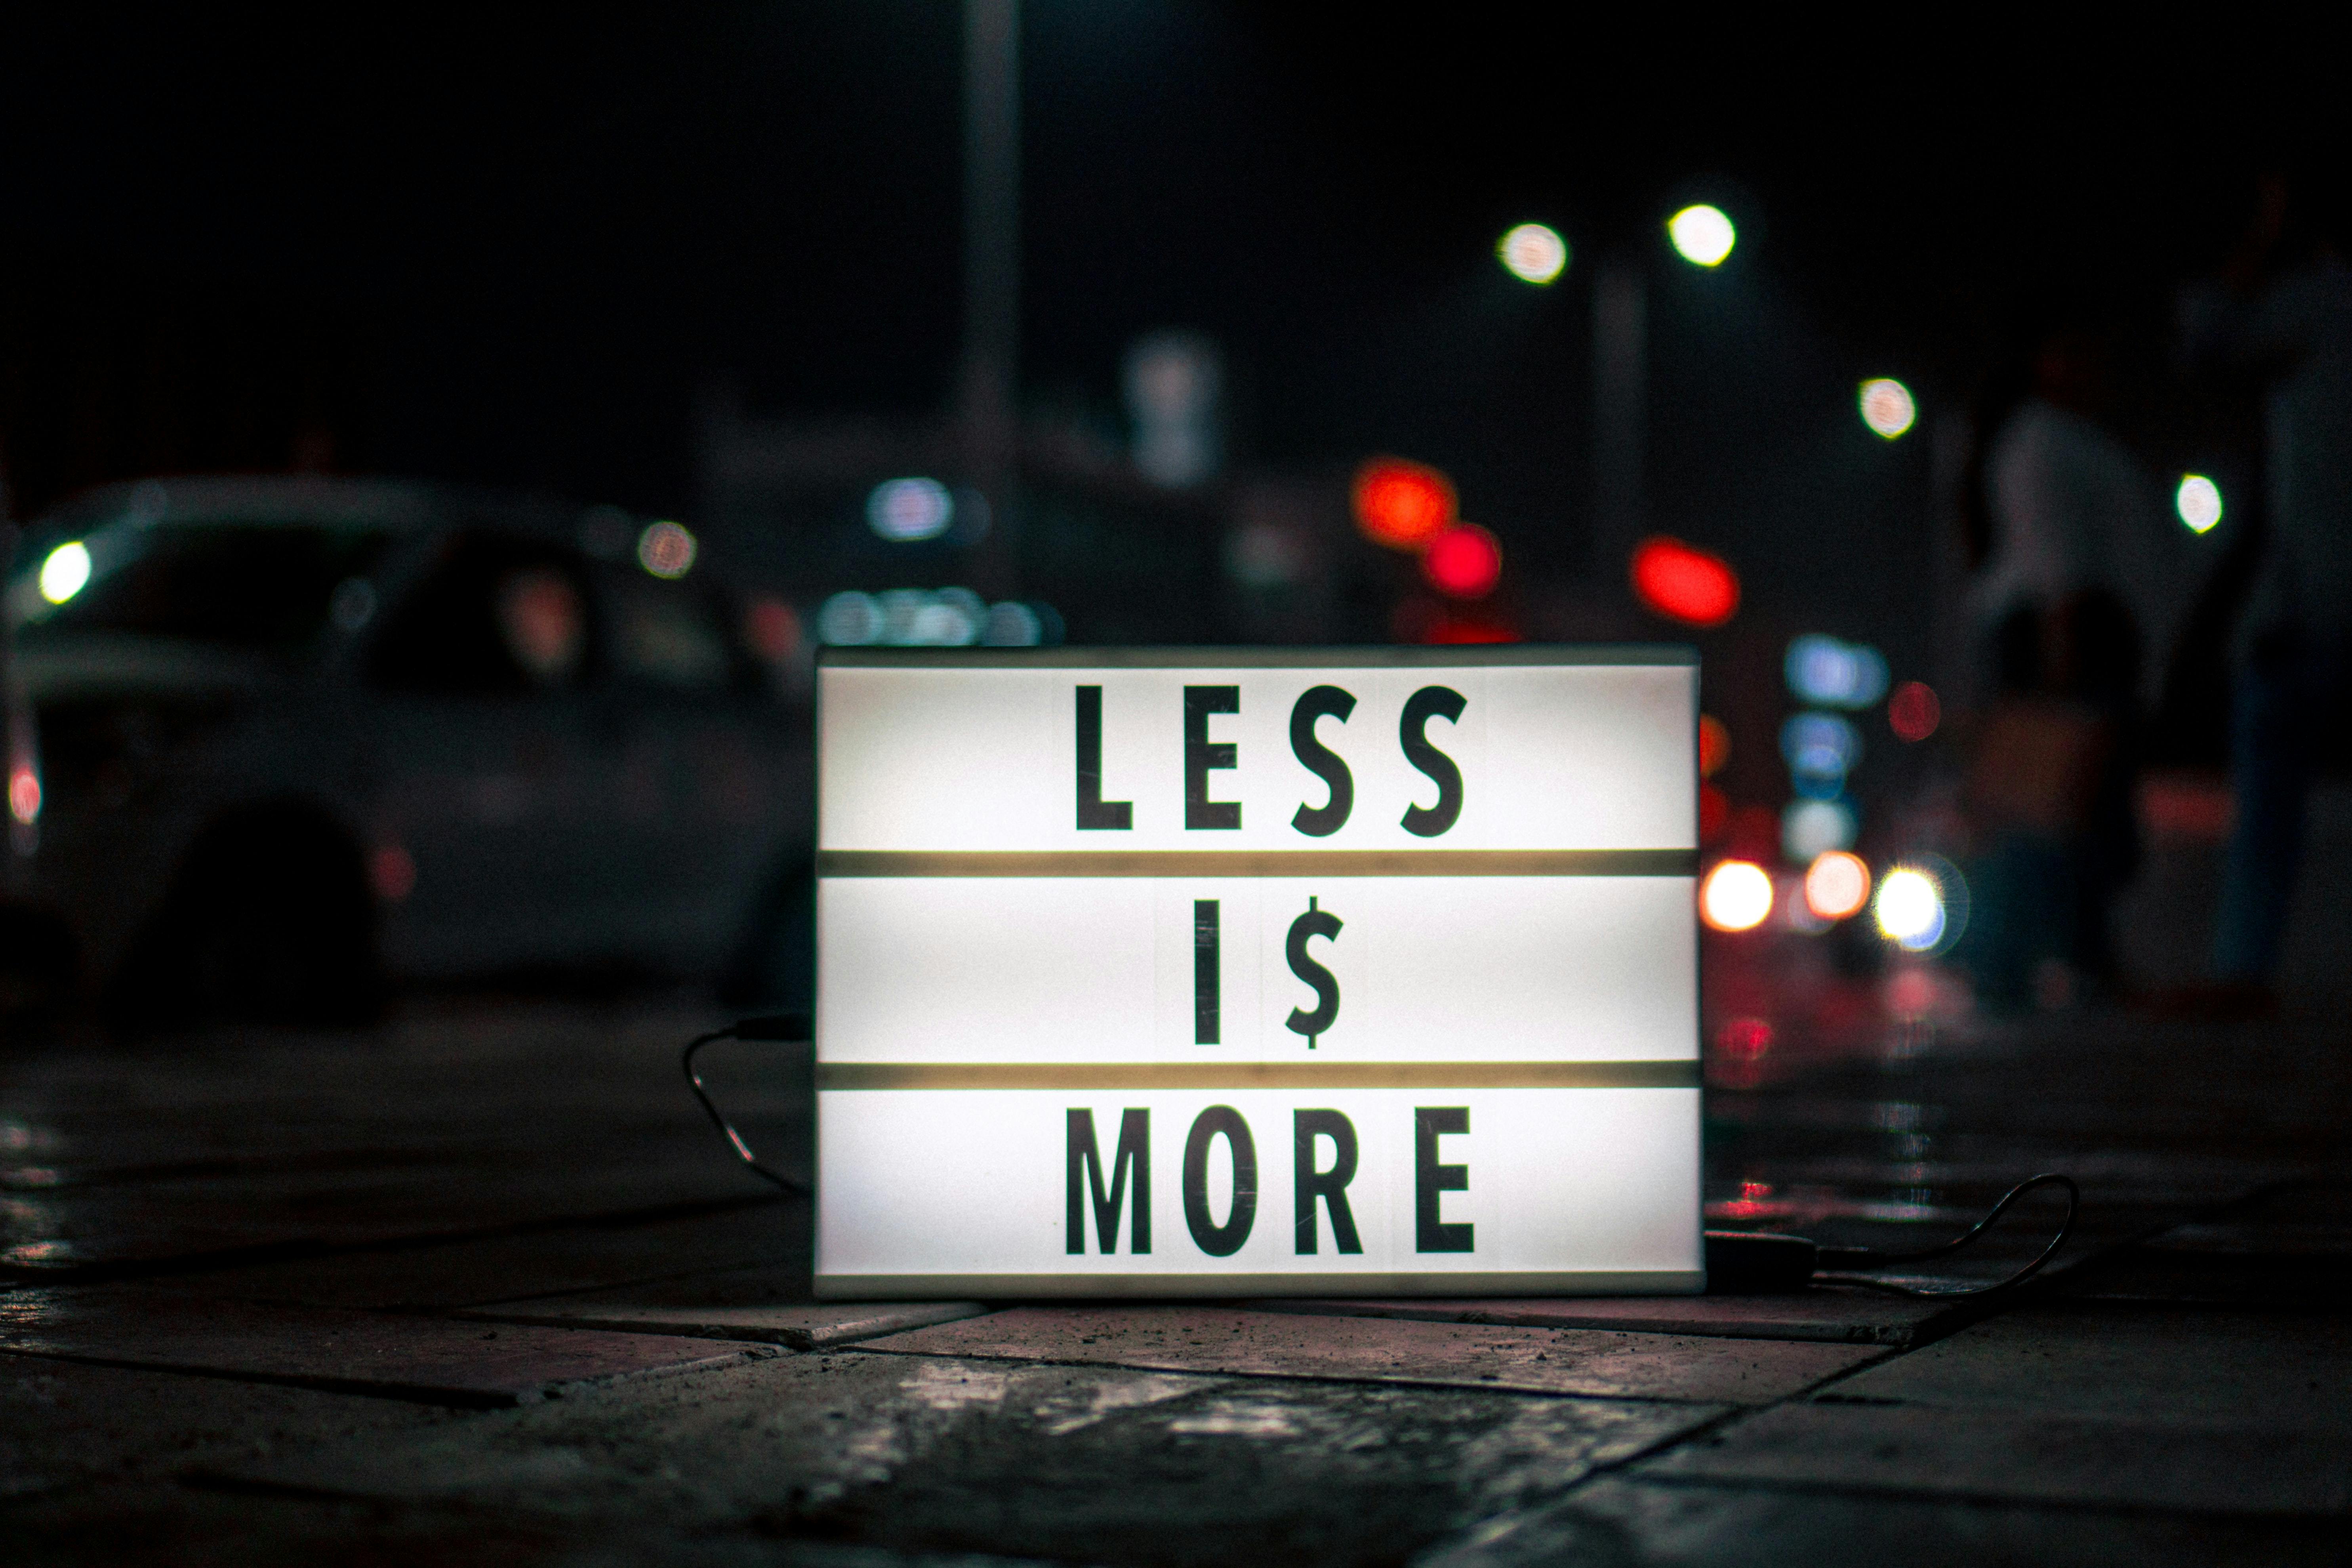 less i$ more signage using dollar sign instead of letter s